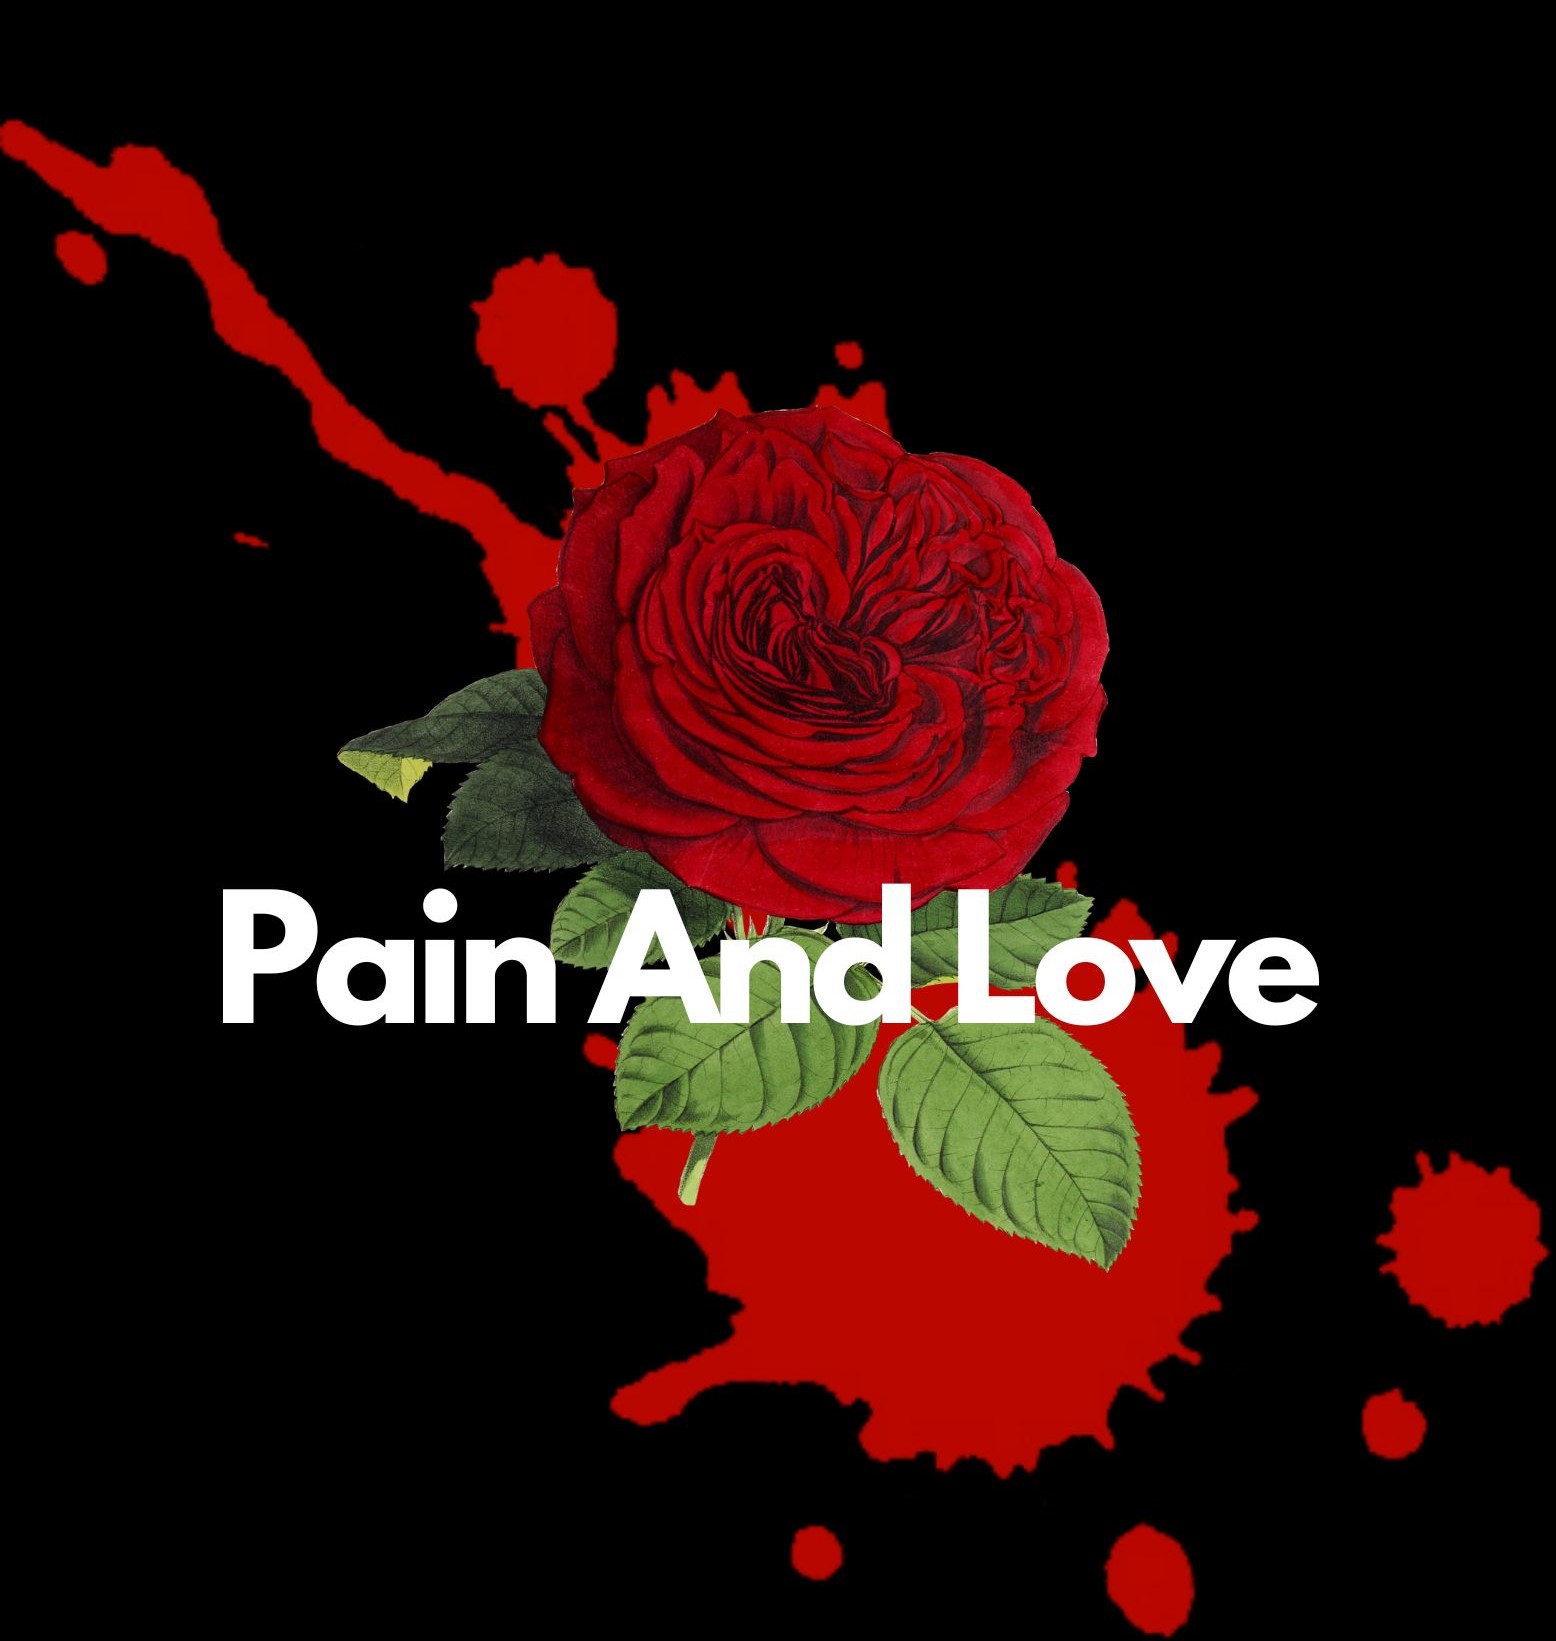 Pain And Love